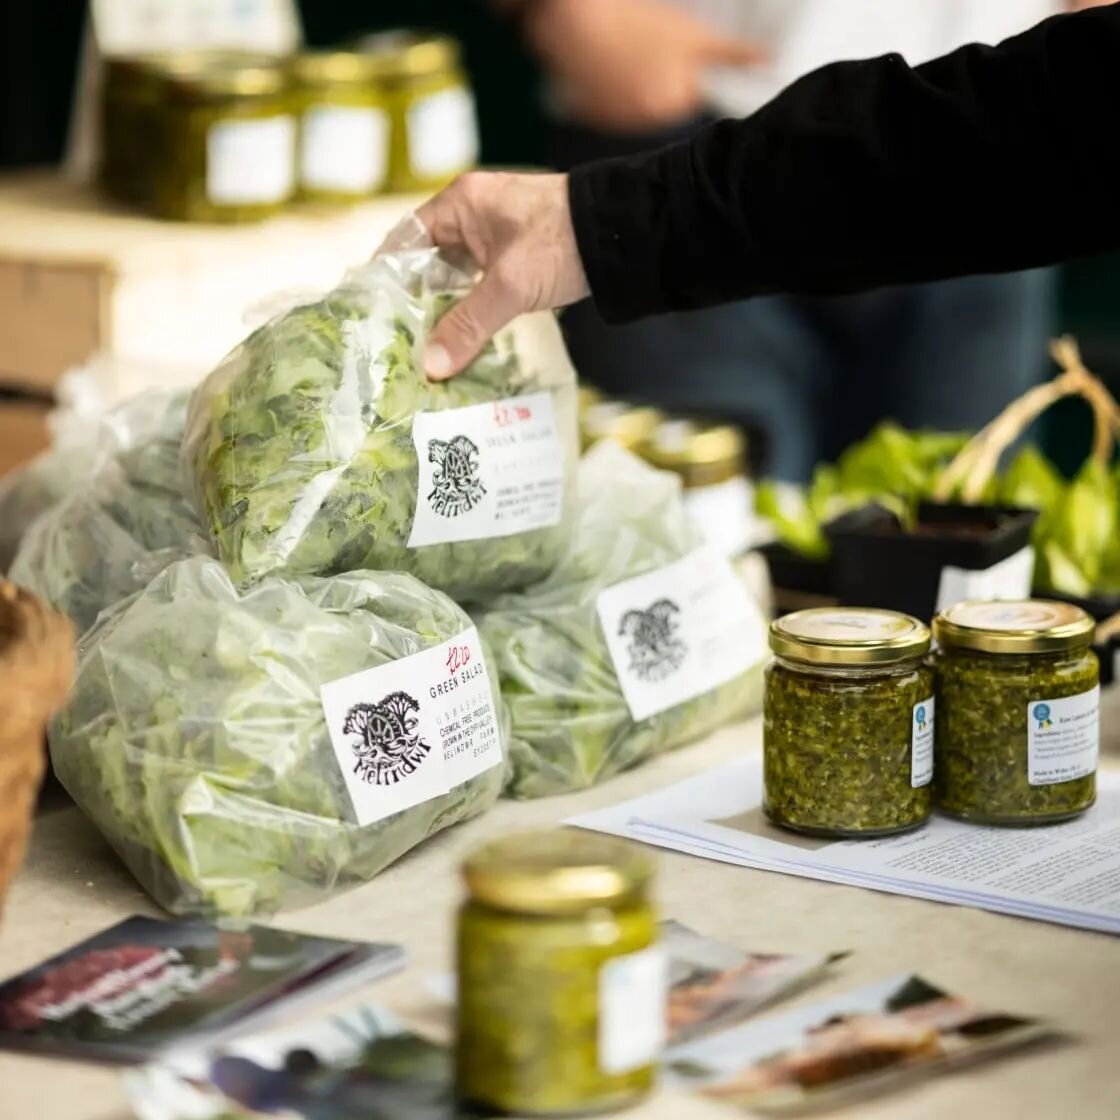 Aber Food Coop and T&ecirc;g at the farmers market! We have been making surplus local produce into tasty, ready to eat products... see you at the next one, 7th May with some sorrel and wild leek chimichurri, and spicy salad pesto
Pictures by @huwsgar